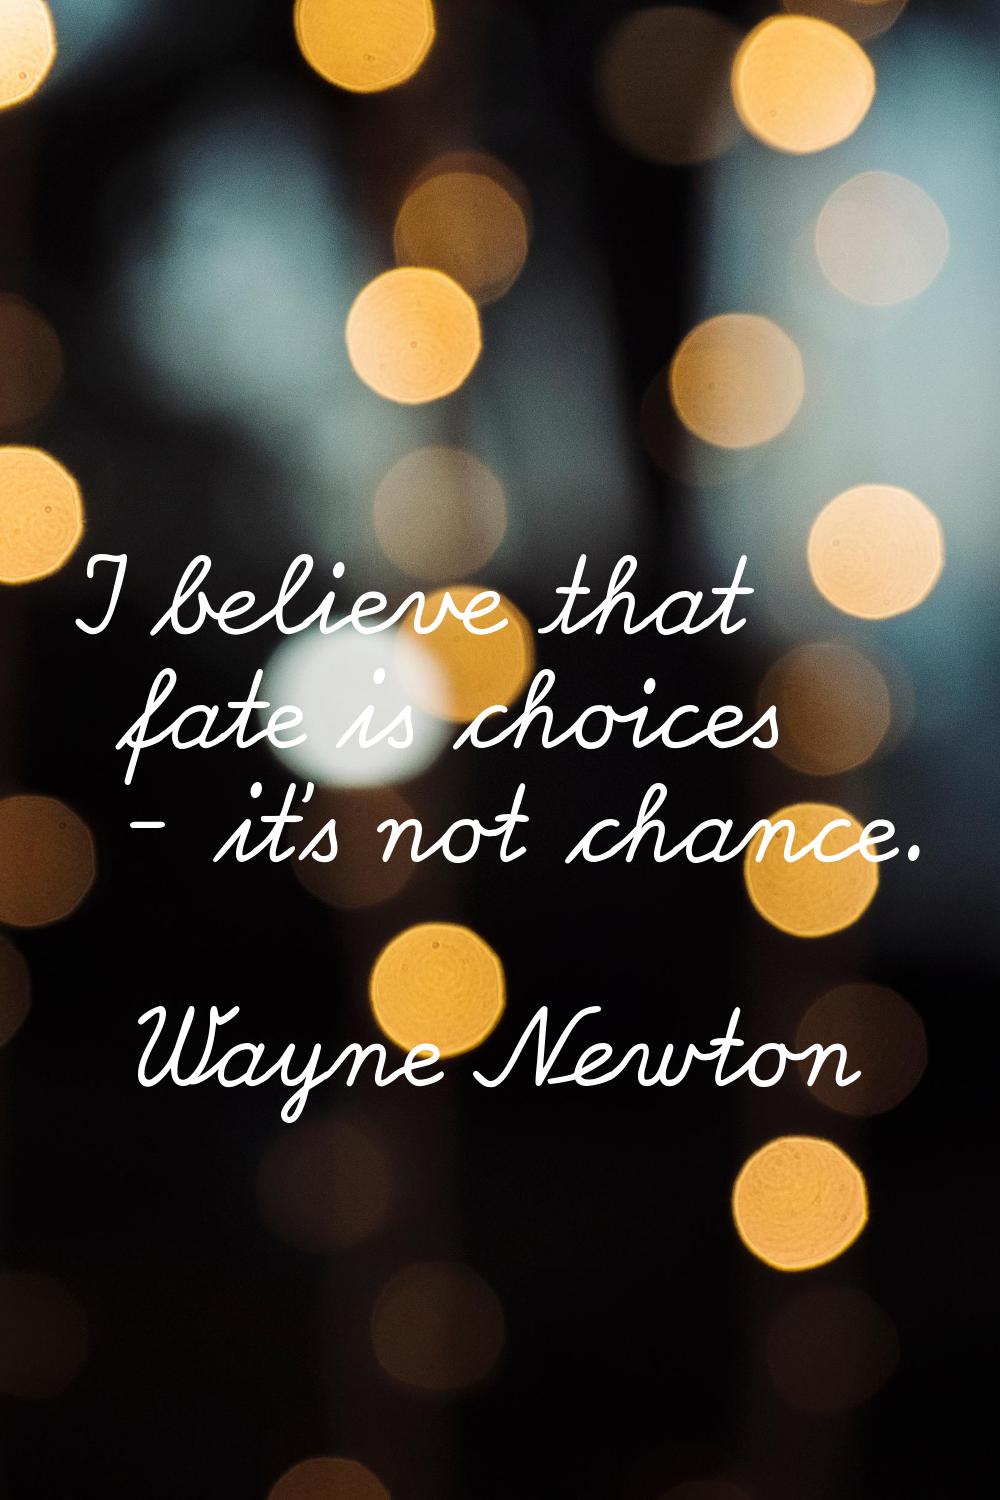 I believe that fate is choices - it's not chance.